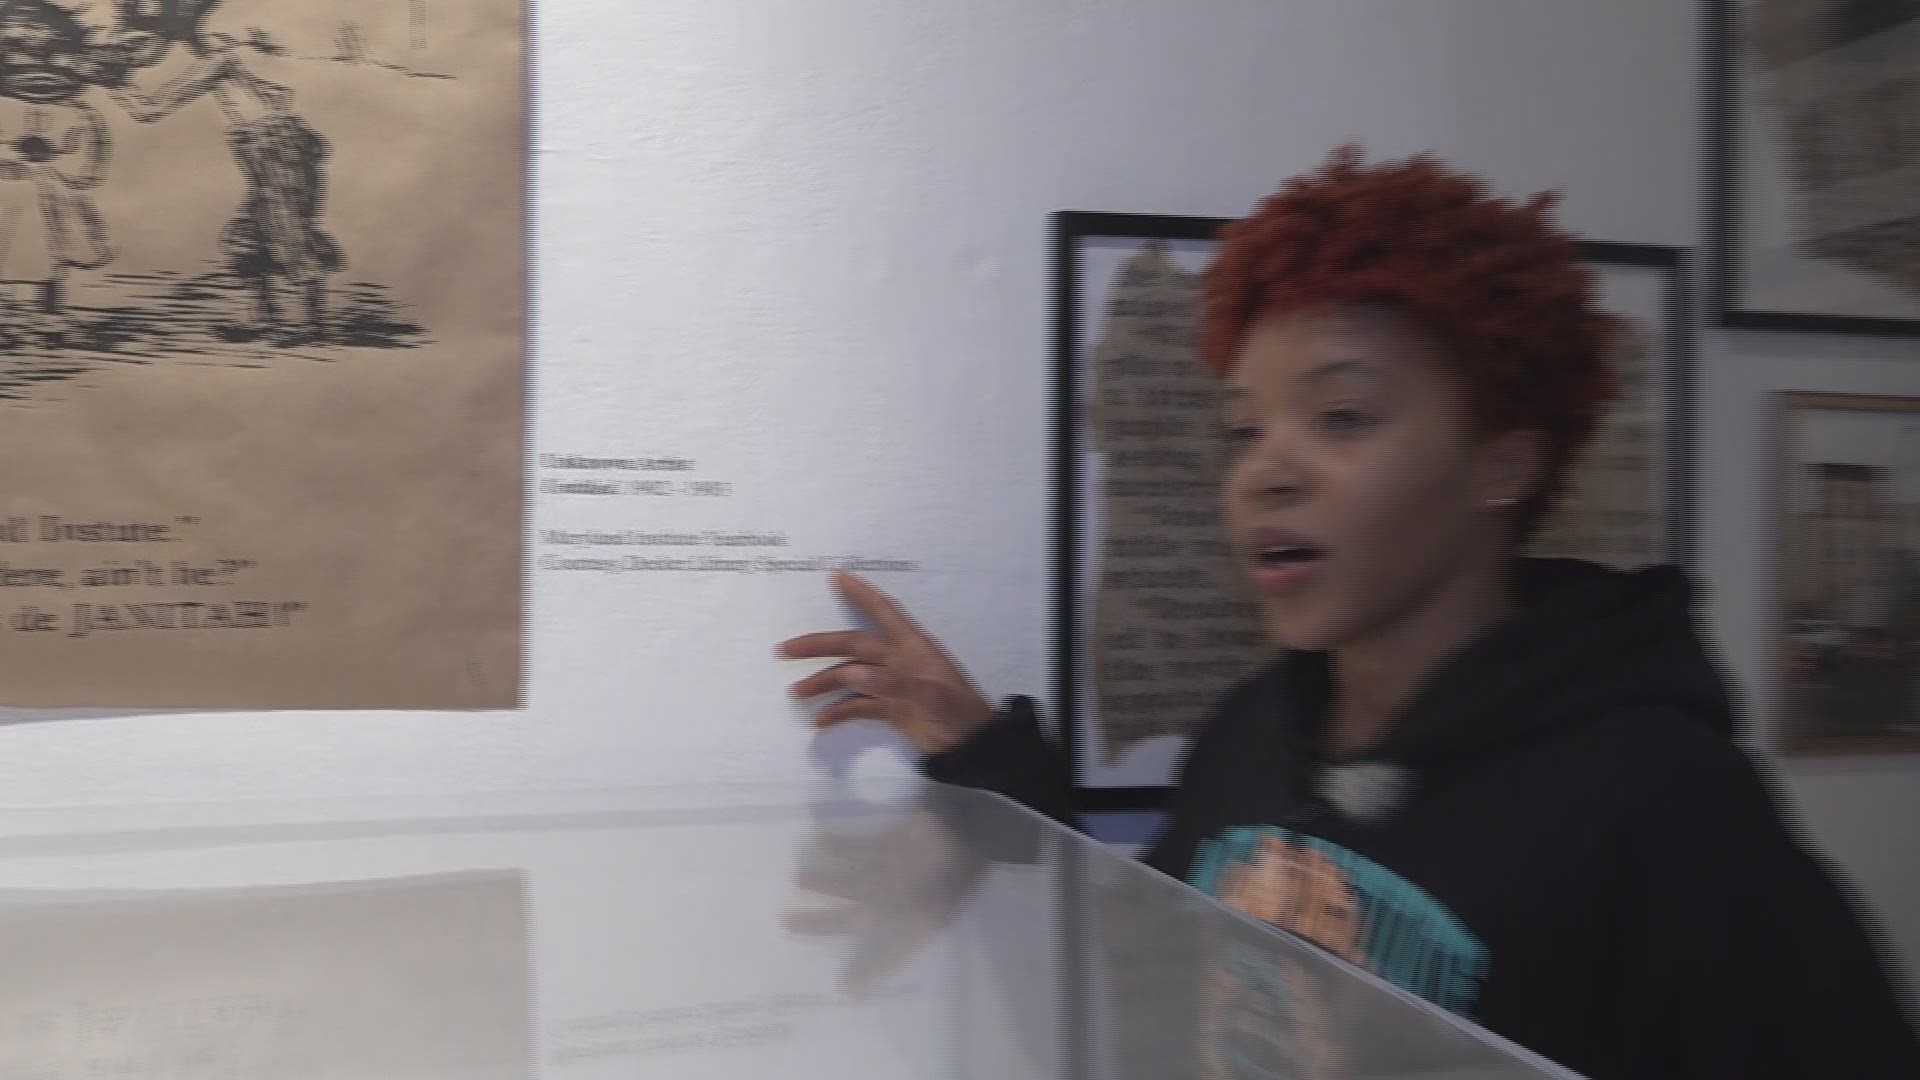 Senior Deyane Moses, a senior photography major at the Maryland Institute College of Art in Baltimore,  didn’t just reveal the truth – she created an installation exhibit about it.